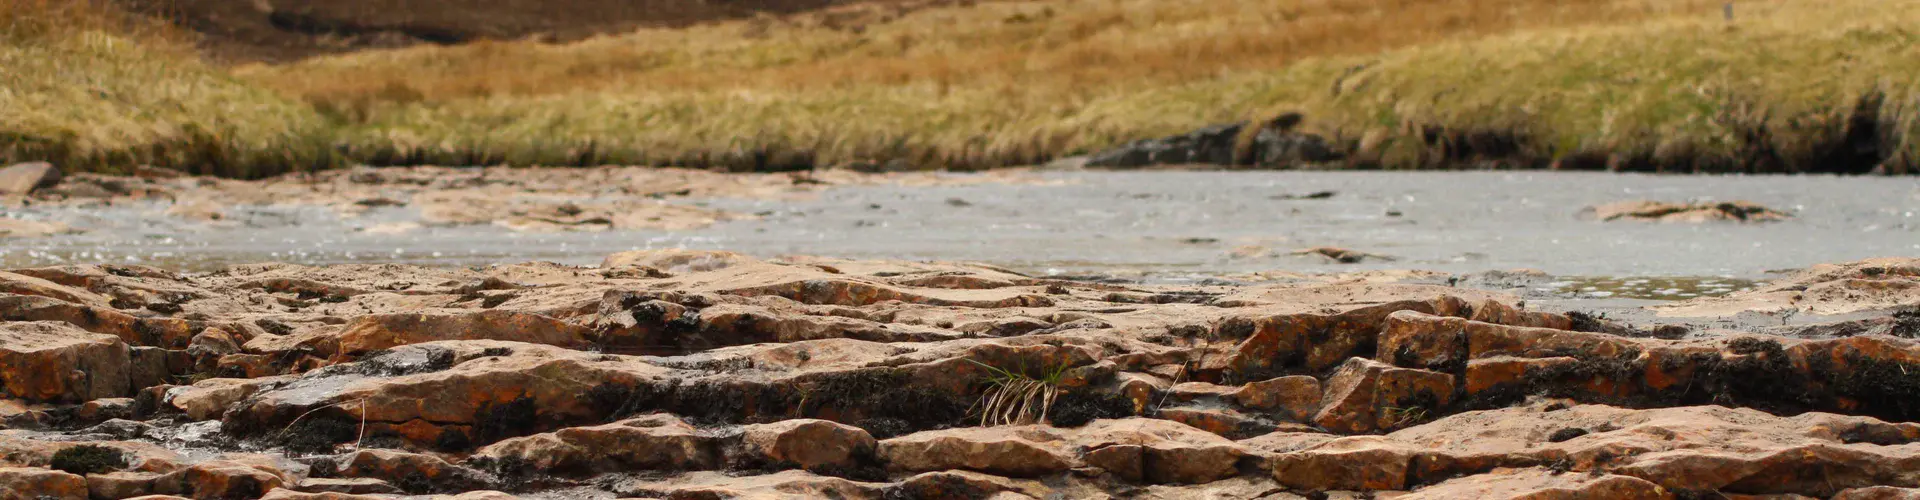 Dry river bed in a peat upland in Northern England (Credit: Catherine Moody, distributed via imaggeo.egu.eu)